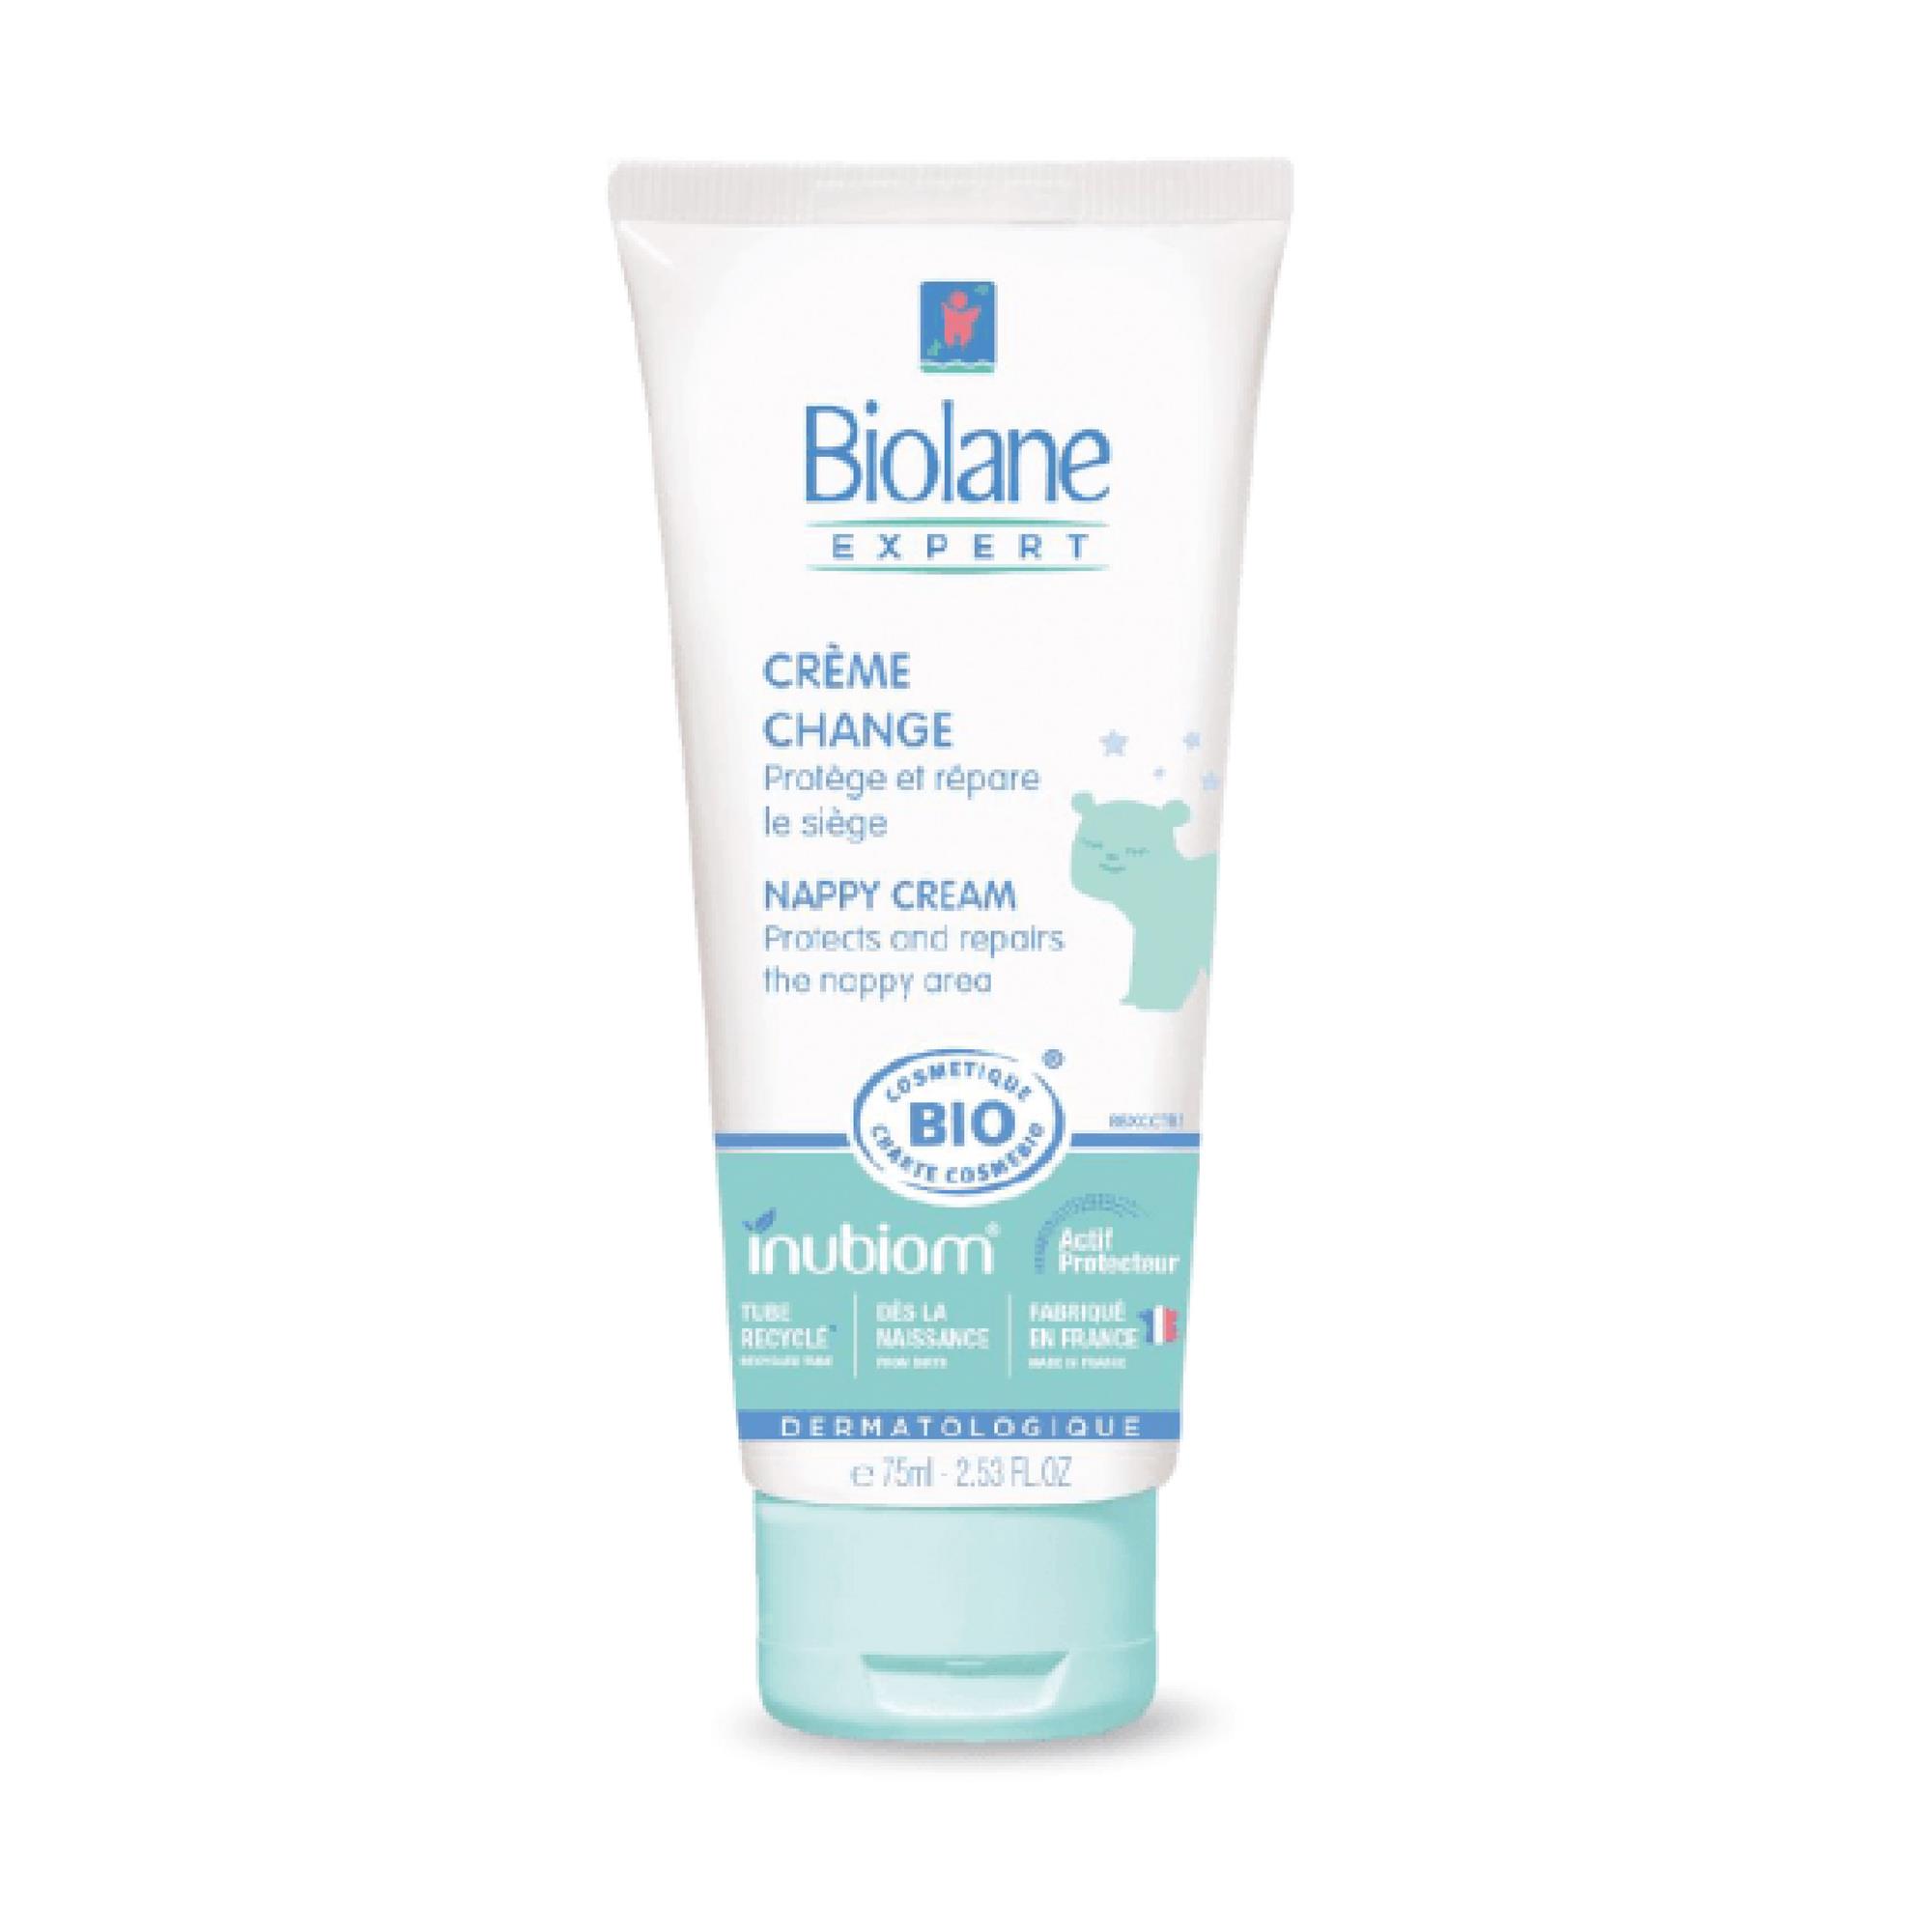 Buy Biolane Creme Change 100Ml online - Free delivery available in